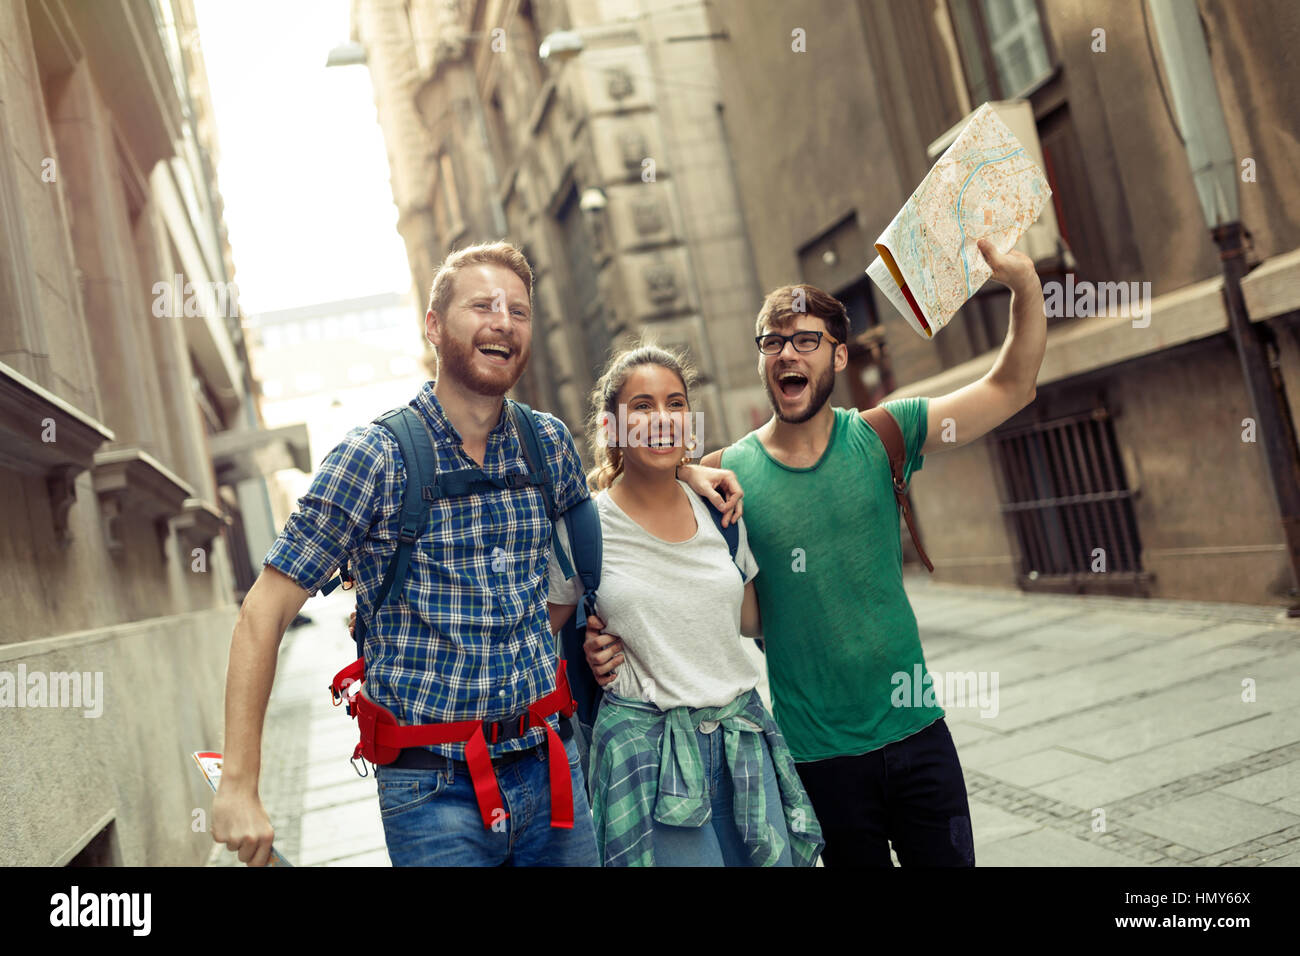 Happy group of students on sightseeing and travel adventure Stock Photo